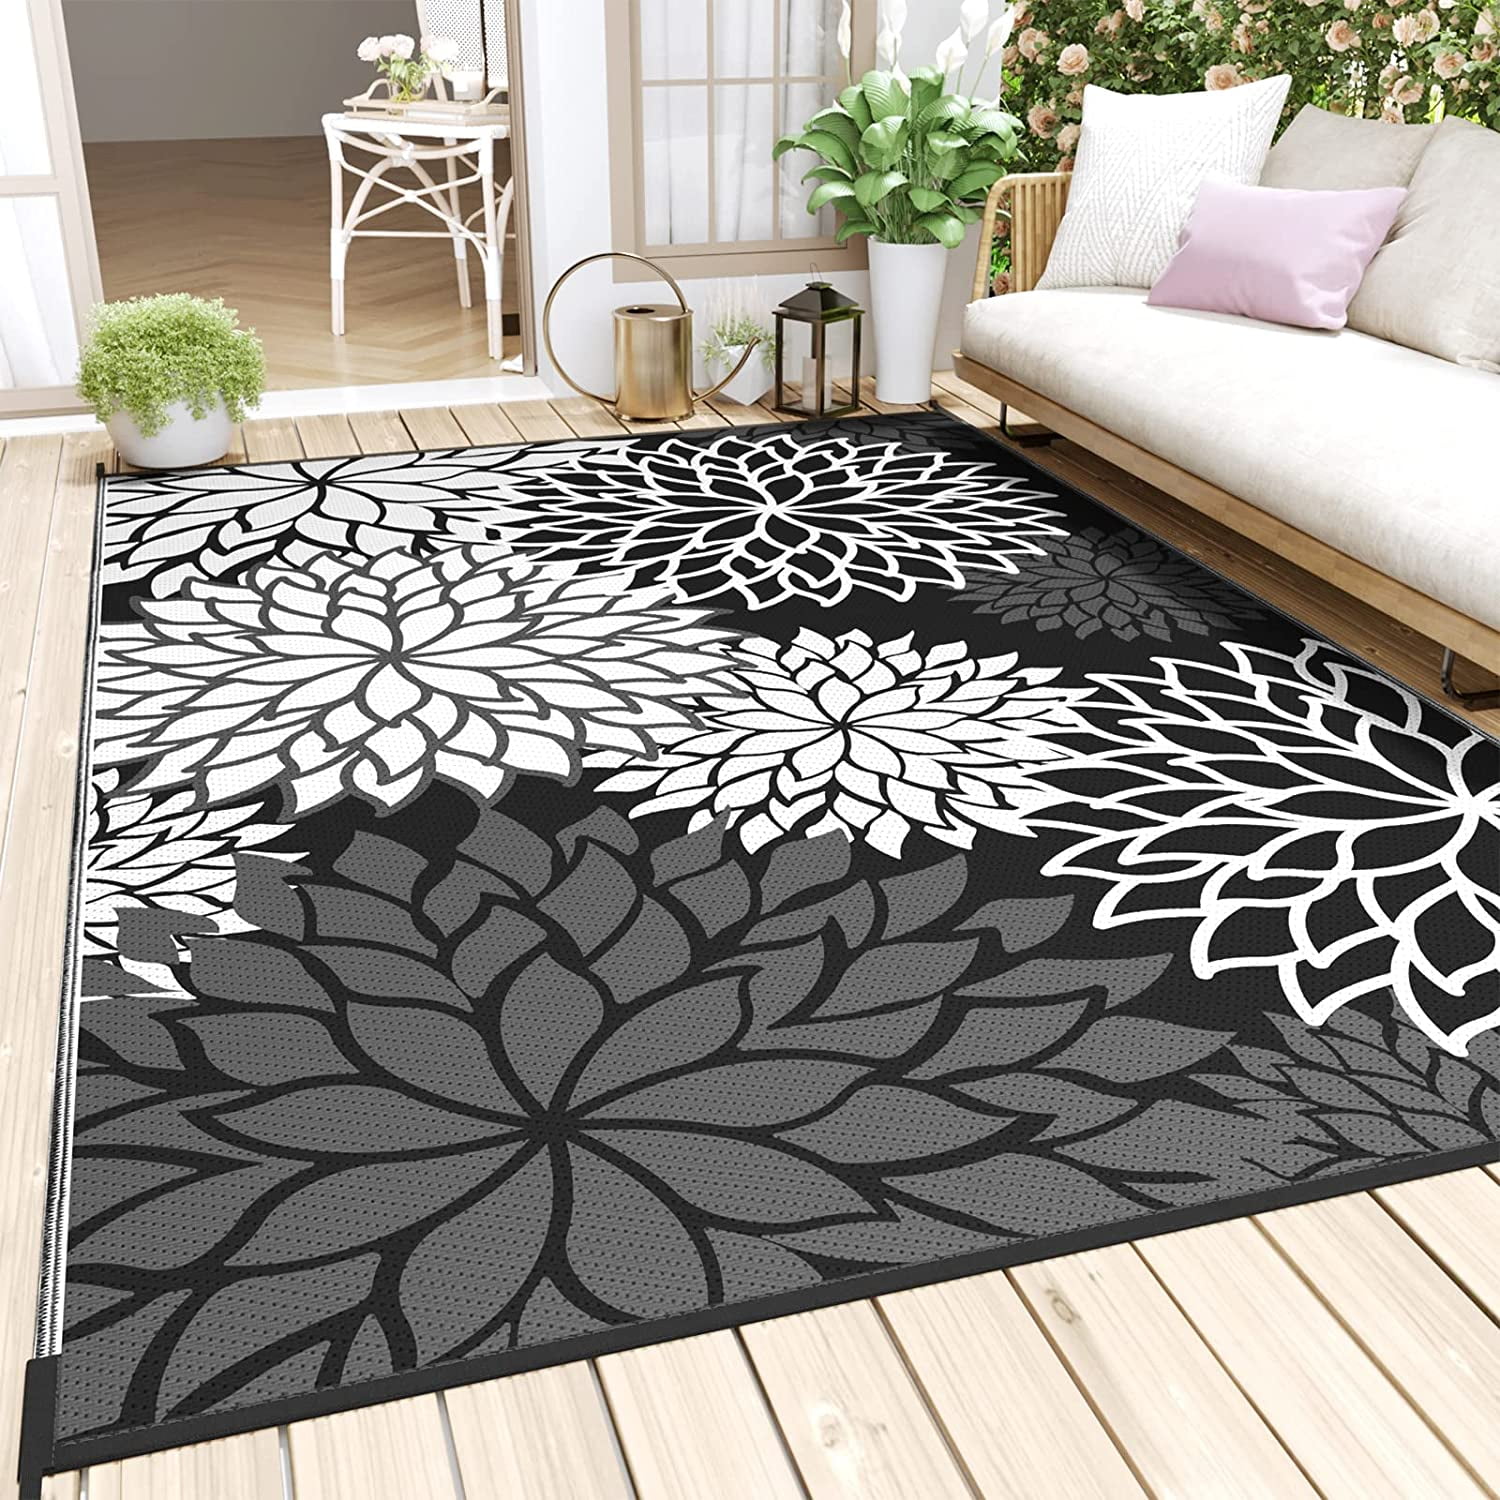 Black & White Mesa Outdoor Rug 4X6 Ft – DII Home Store